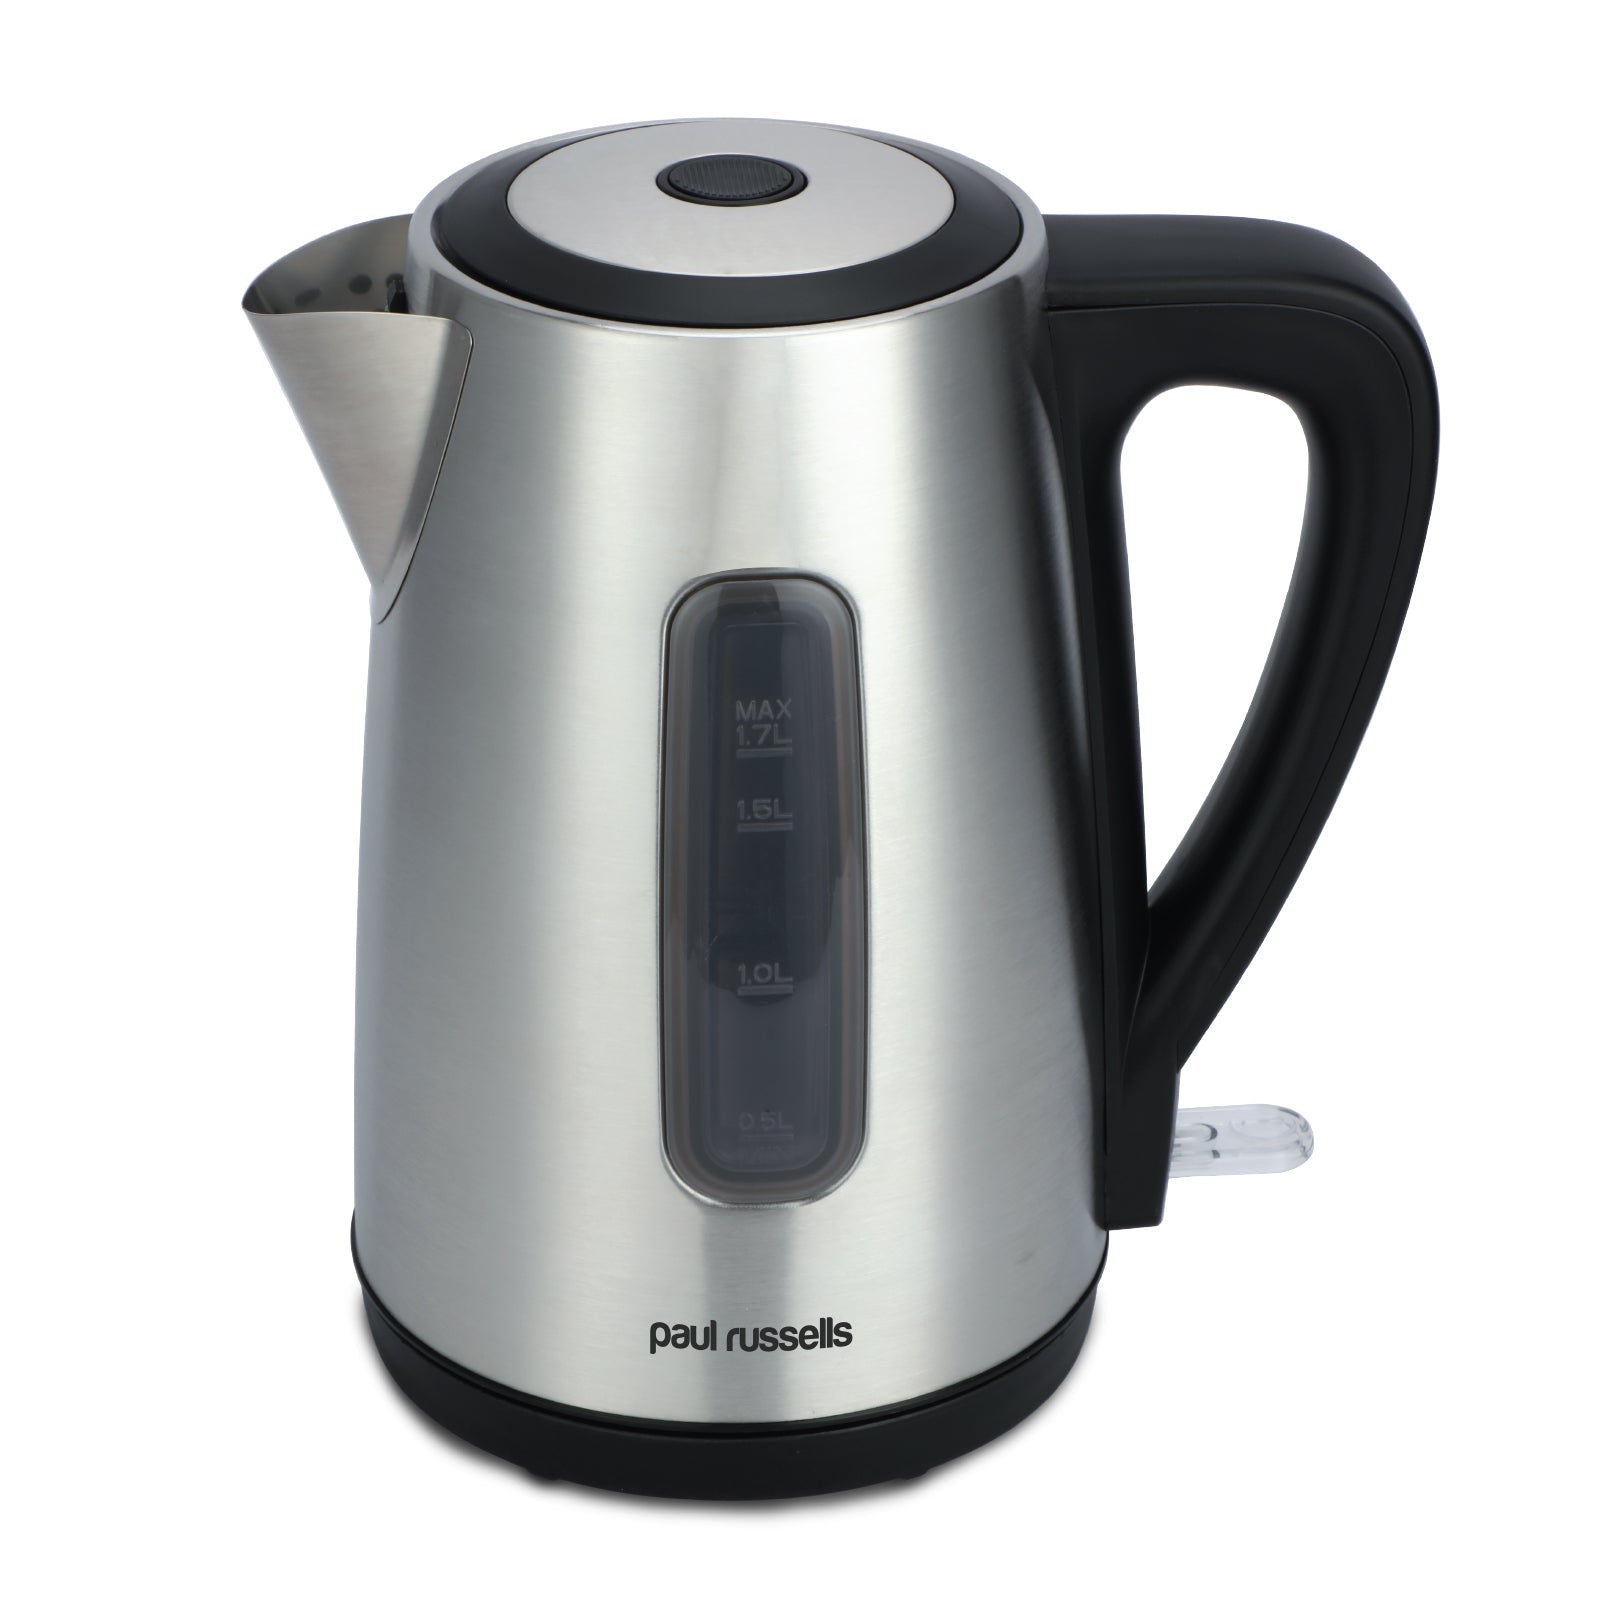 Paul Russells 1.7-litre 3000w electric kettle is made of stainless steel with 360-degree rotation, fast Boil, auto shut-off feature, removable water filter, UK plug, boil-dry protection, Energy Saving